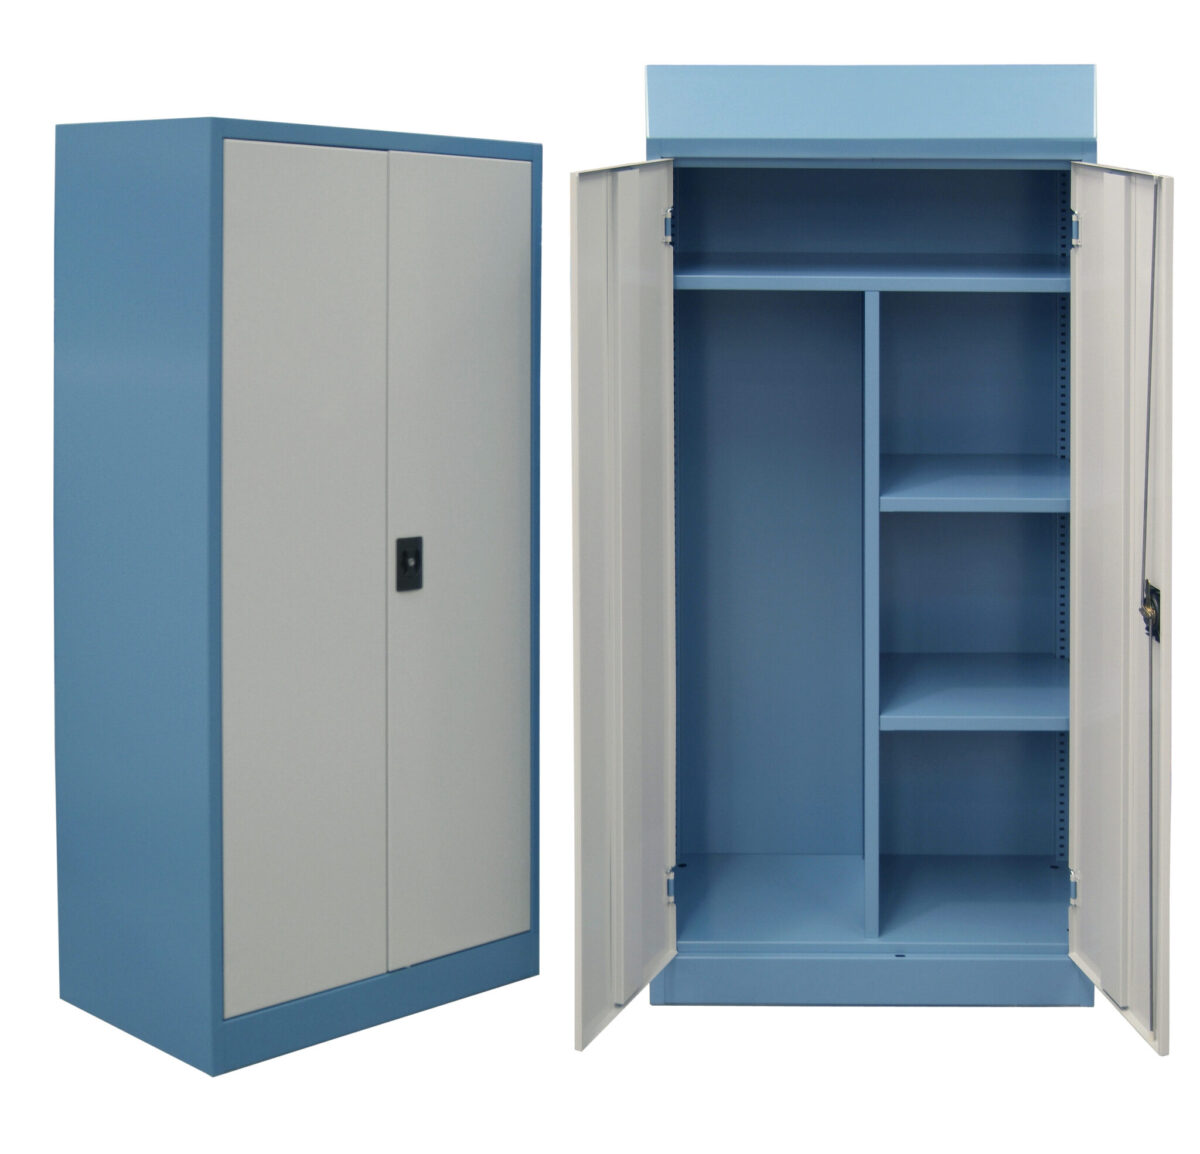 image of industrial storage cabinets with doors open and closed